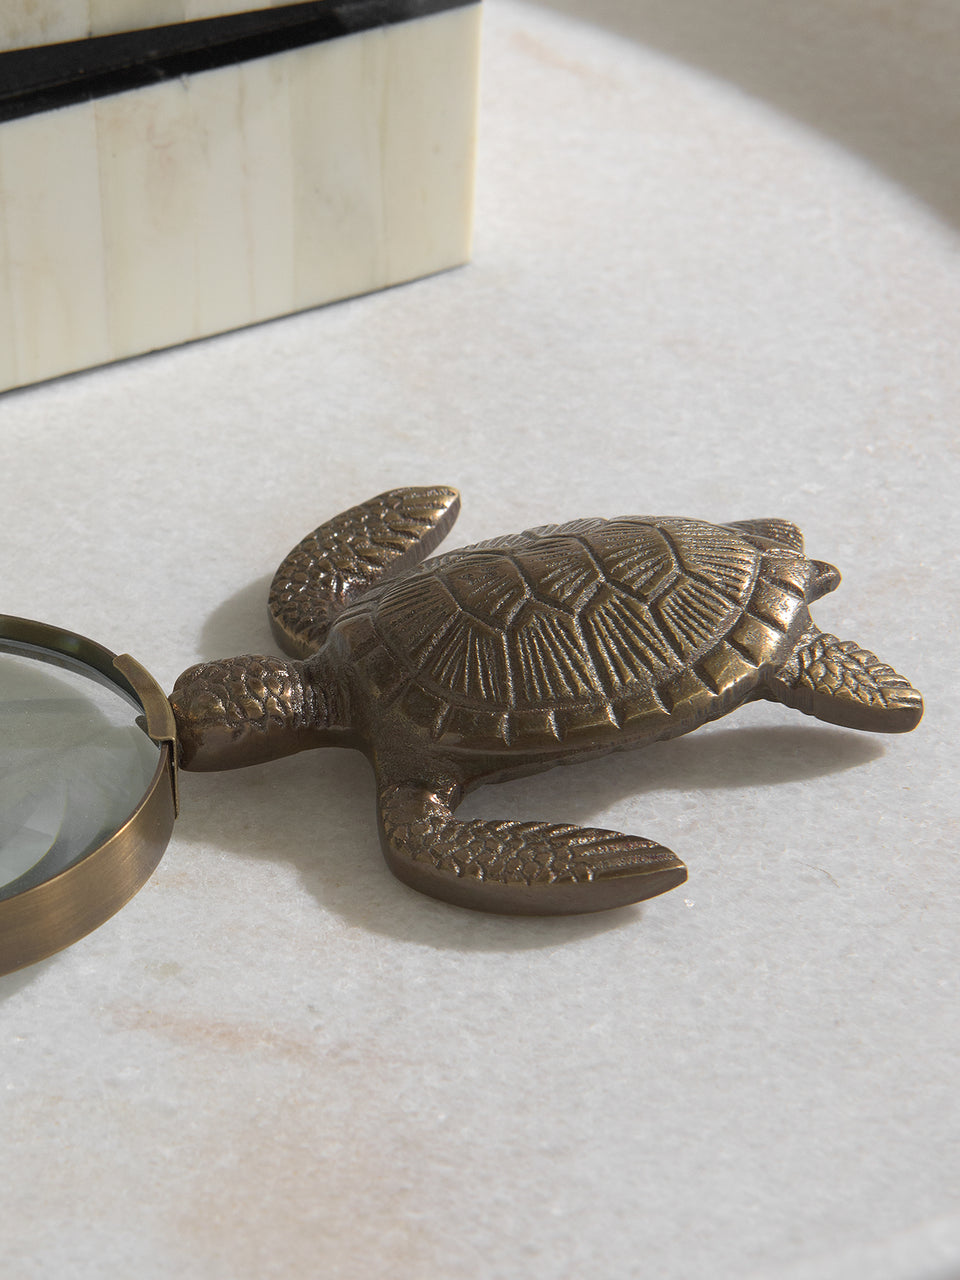 Brass Turtle Magnifying Glass